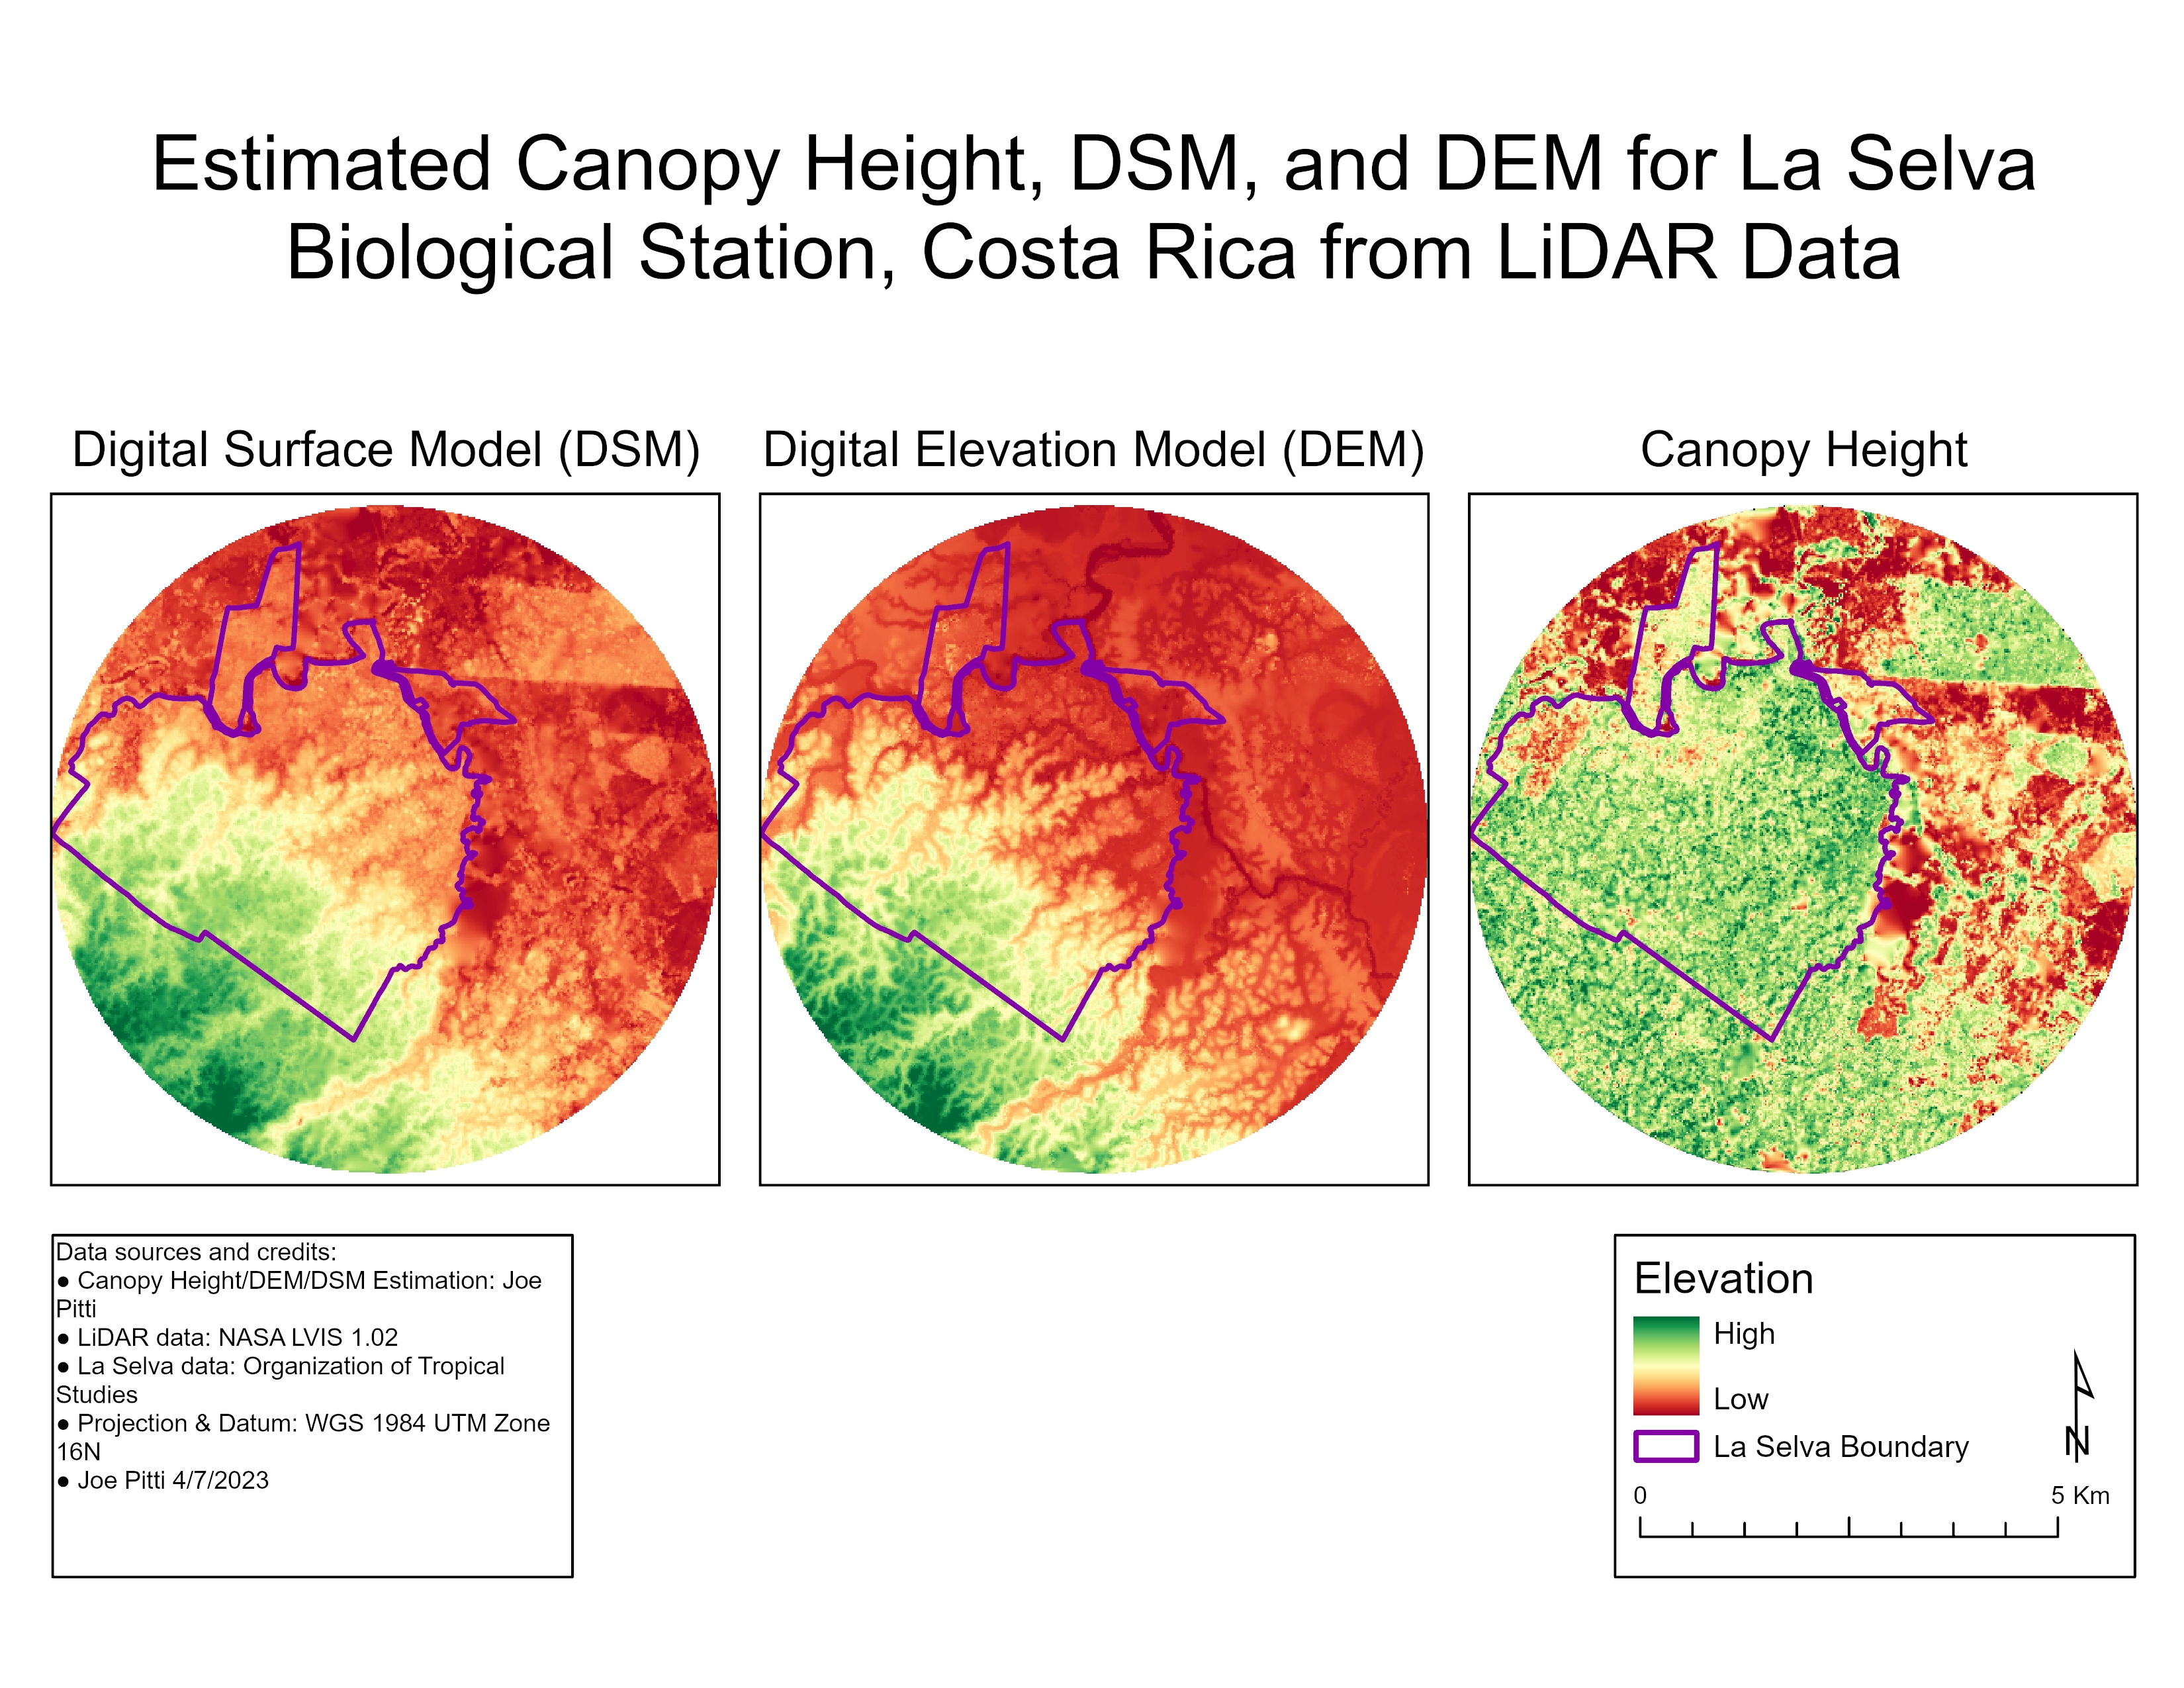 Estimating Canopy Height from LiDAR 